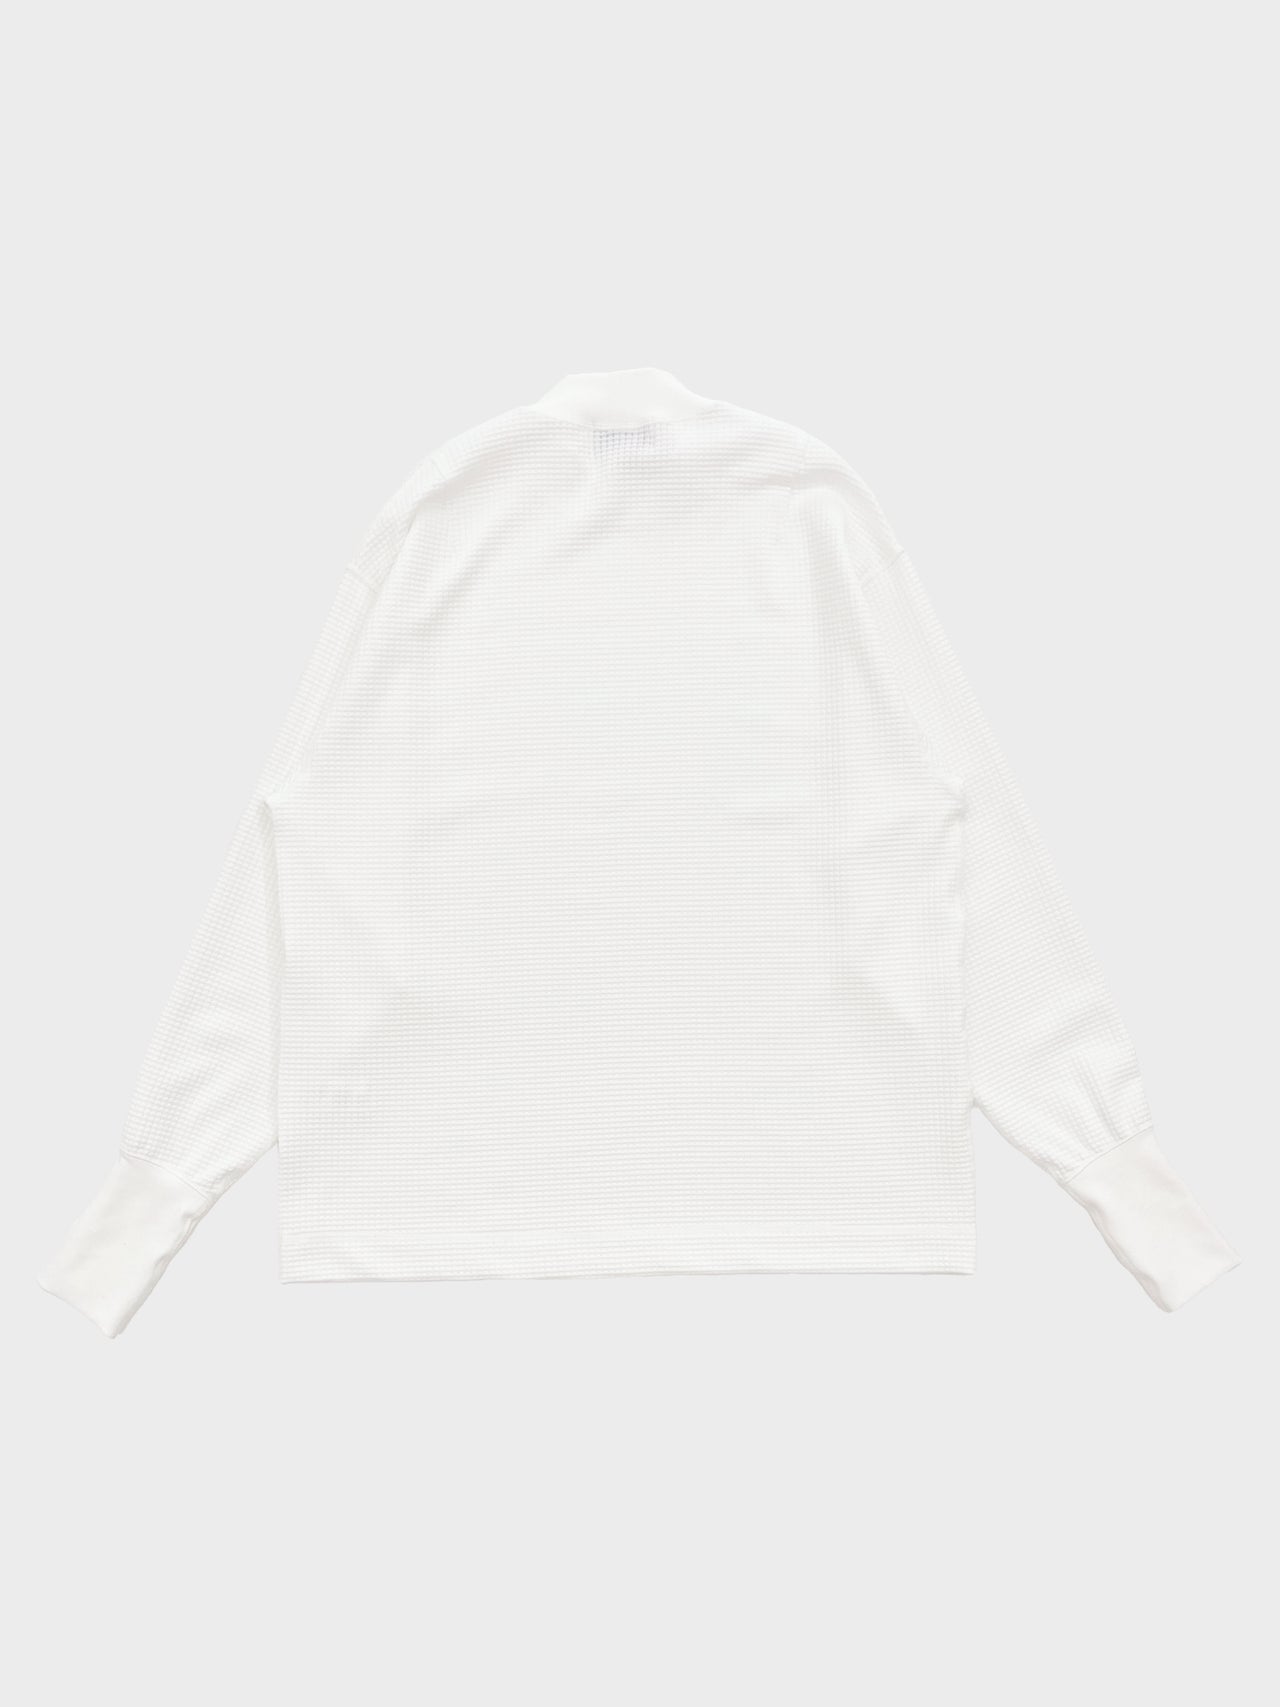 WEWILL /  HIGH NECK WAFFLE T-SHIRT (WHITE)